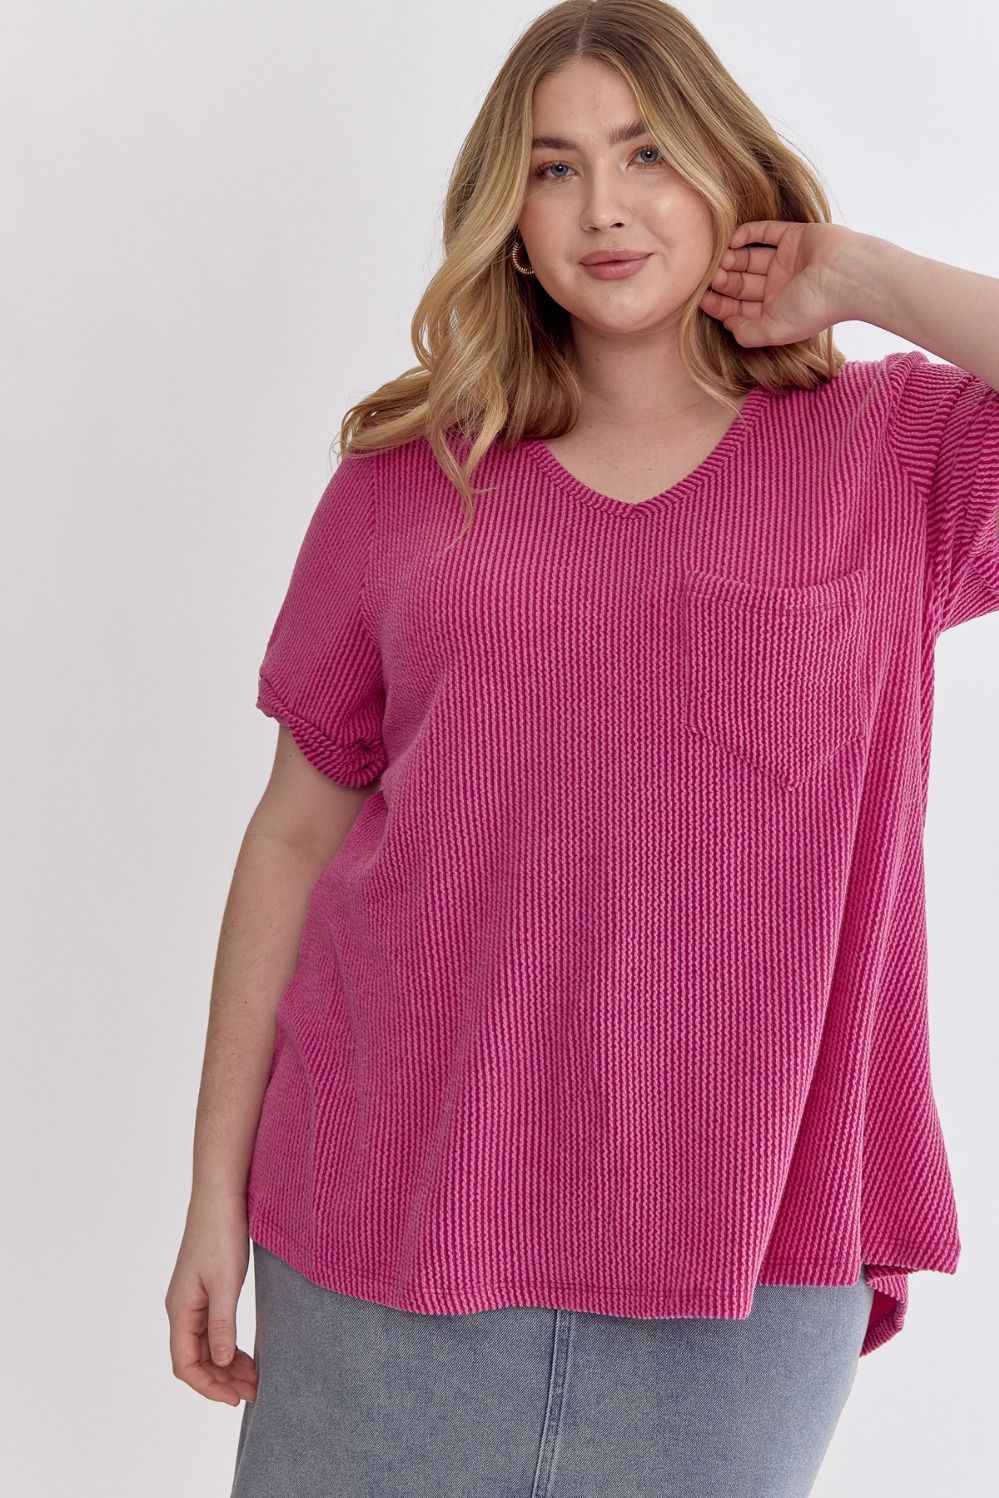 Orchid Textured V-Neck Top - Plus